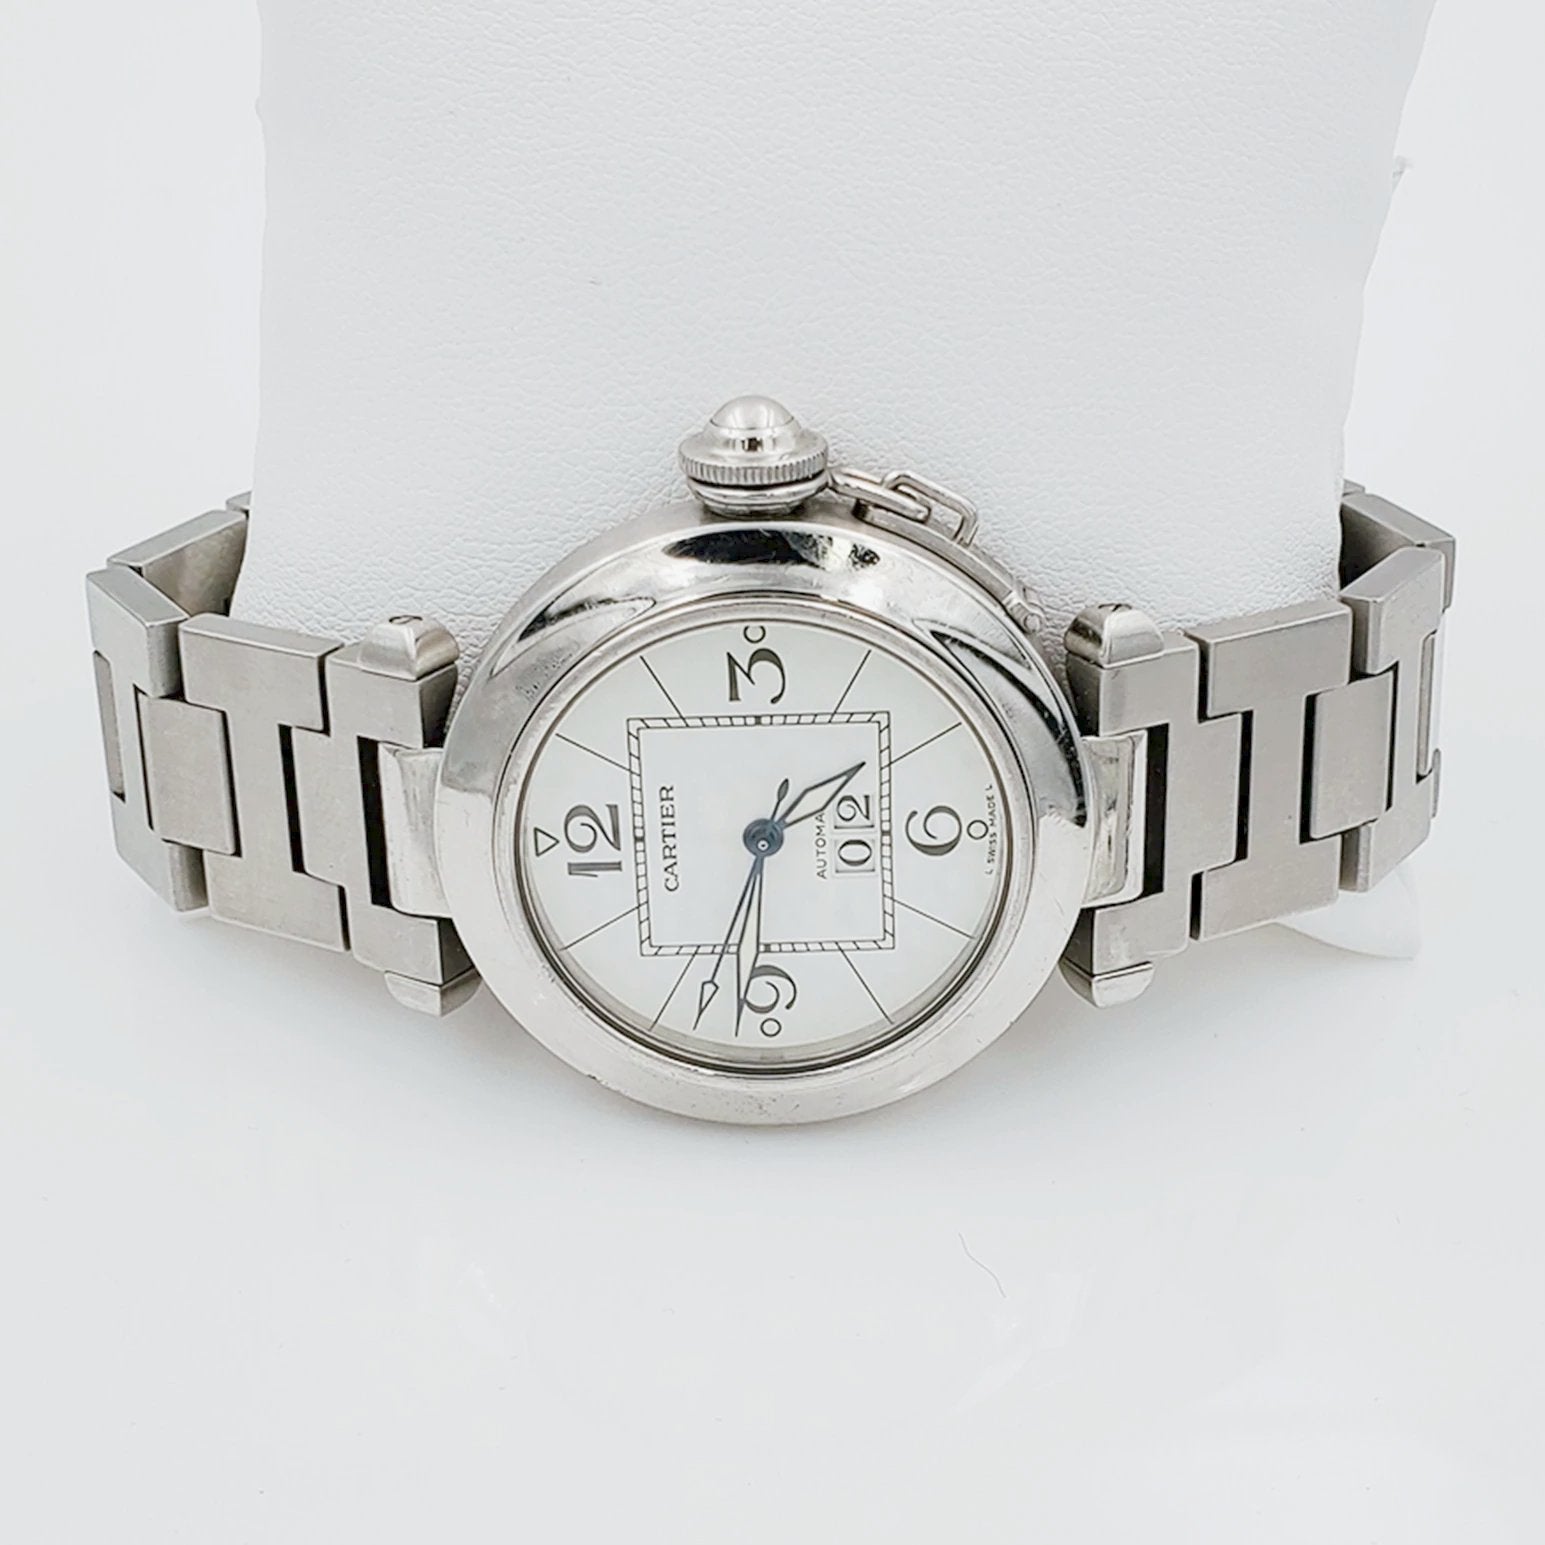 Unisex Medium 36mm Cartier Pasha Watch with White Dial in Matte Stainless Steel. (Pre-Owned)